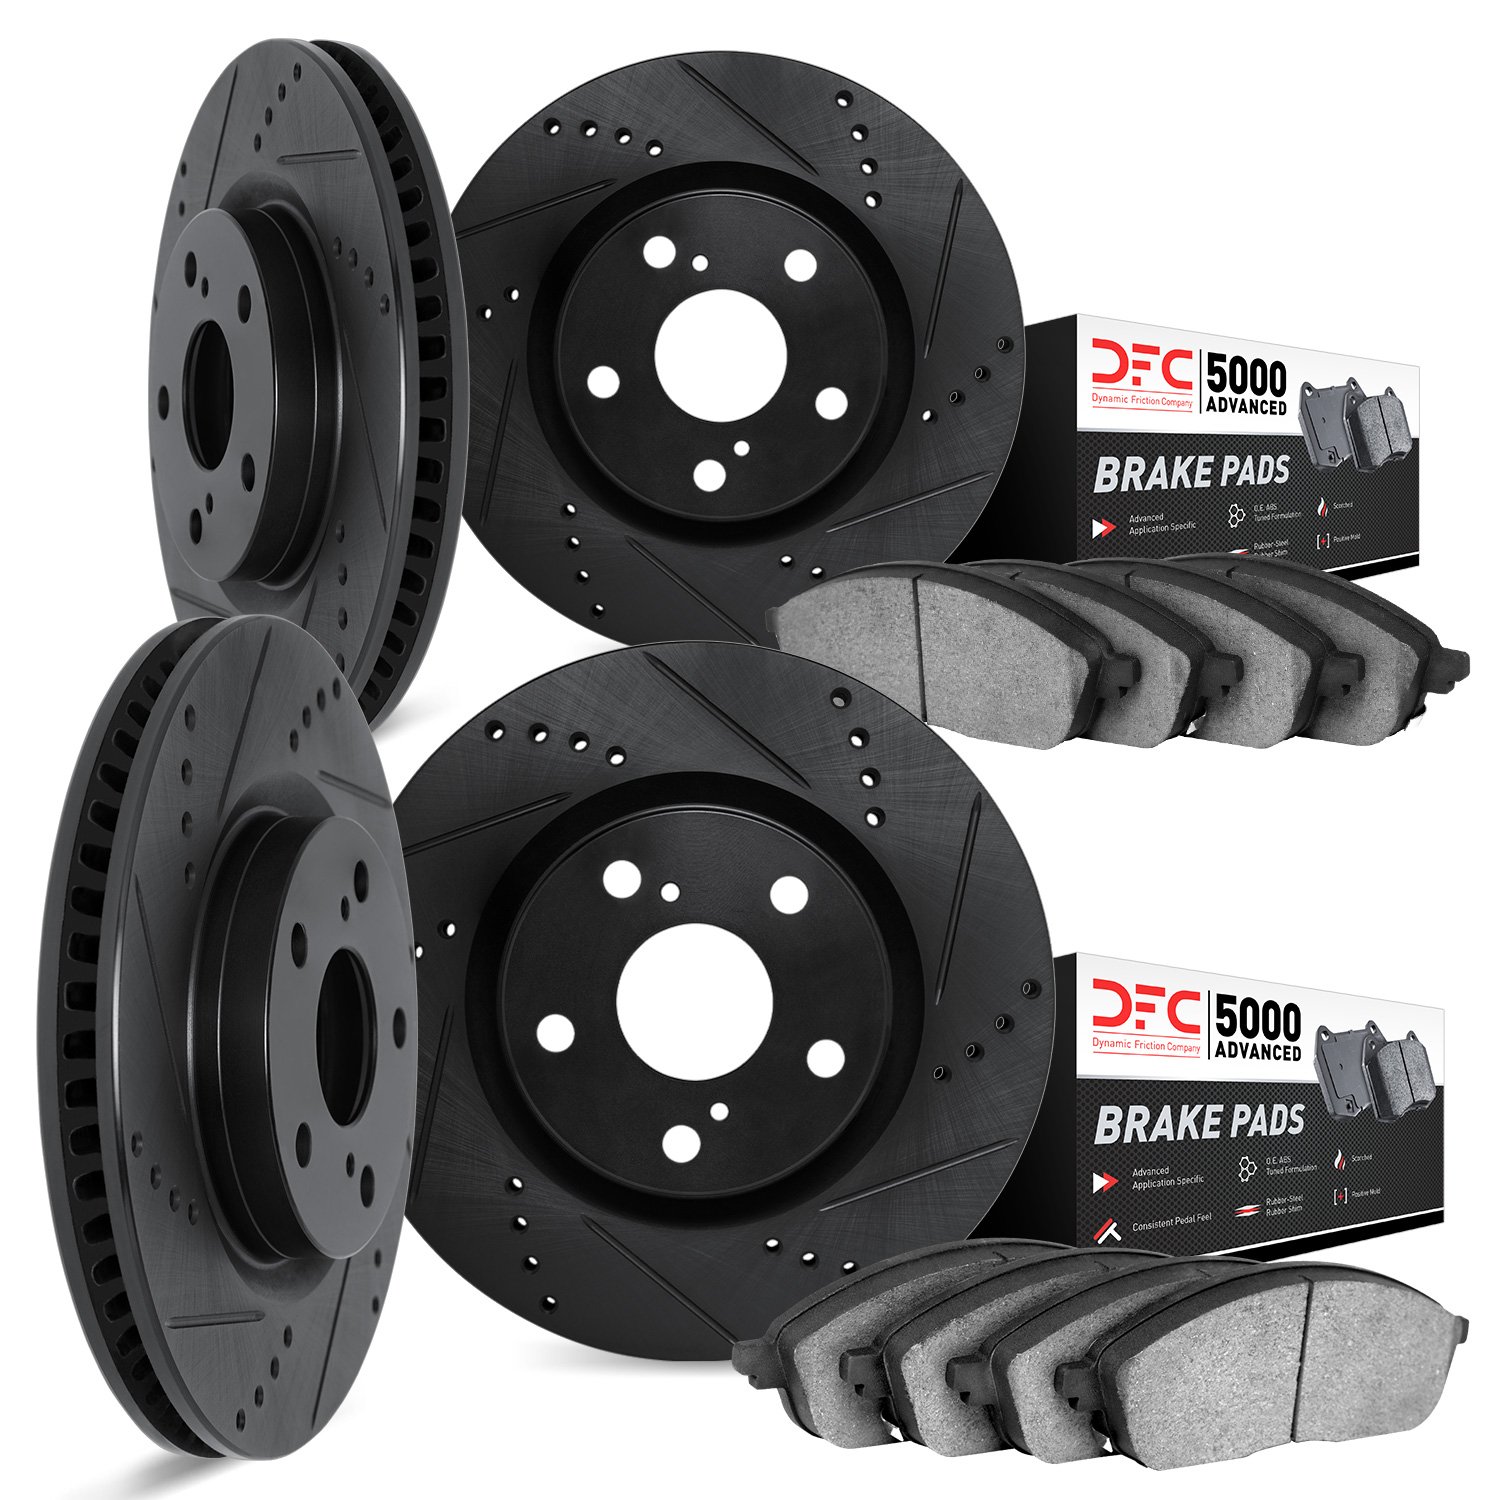 8504-31009 Drilled/Slotted Brake Rotors w/5000 Advanced Brake Pads Kit [Black], 2006-2006 BMW, Position: Front and Rear